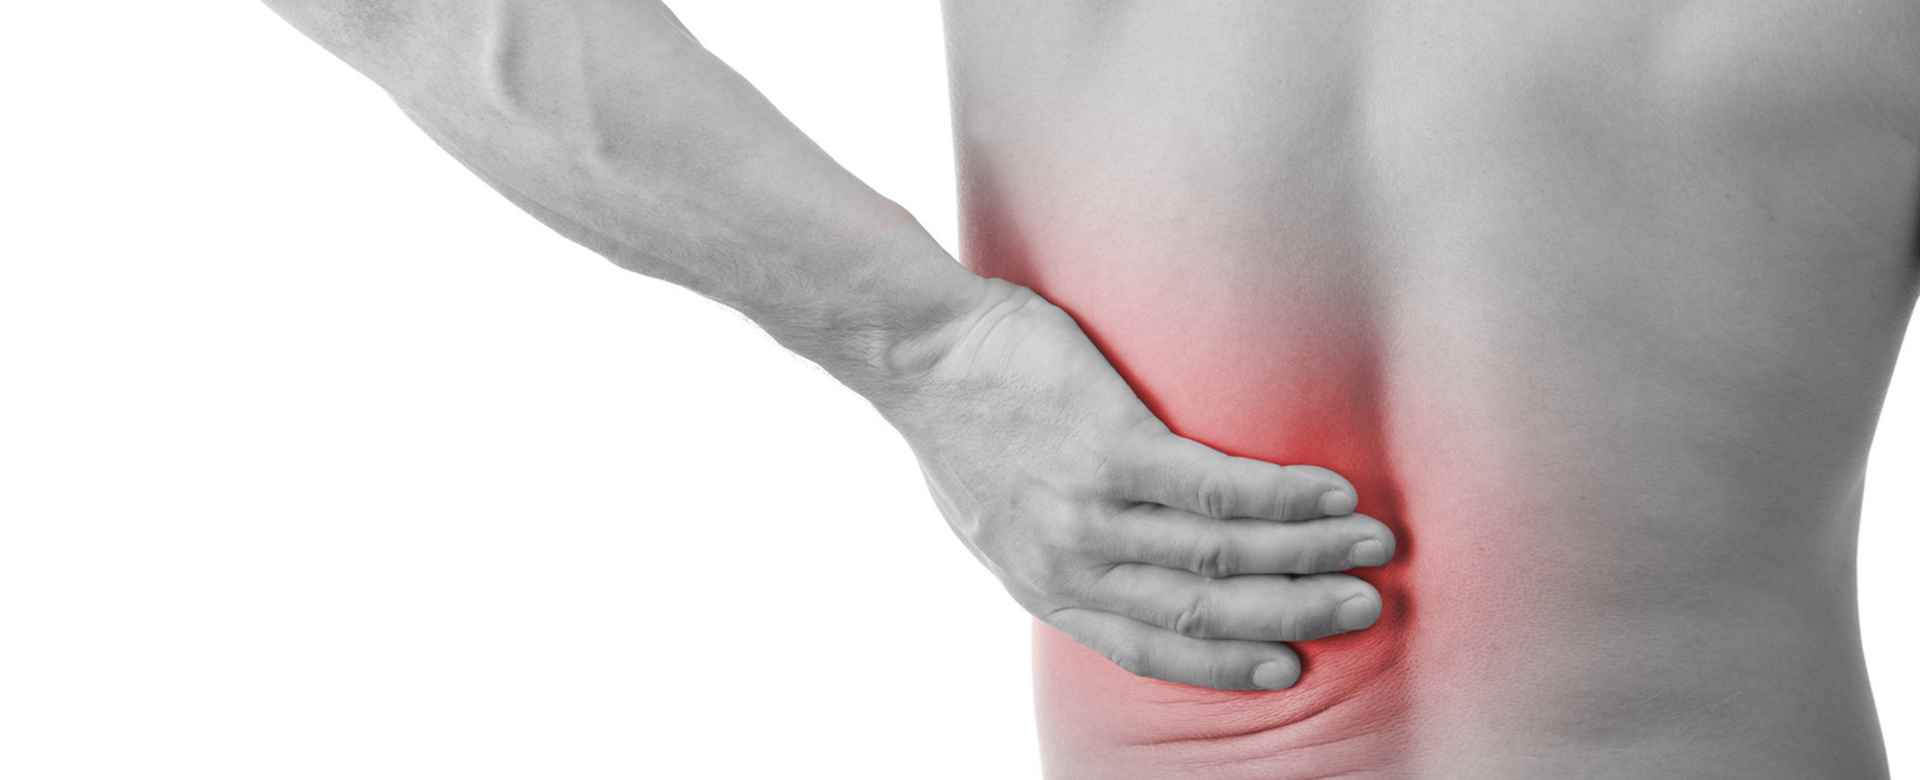 Back pain in the US: Numerous causes, uncertain treatment